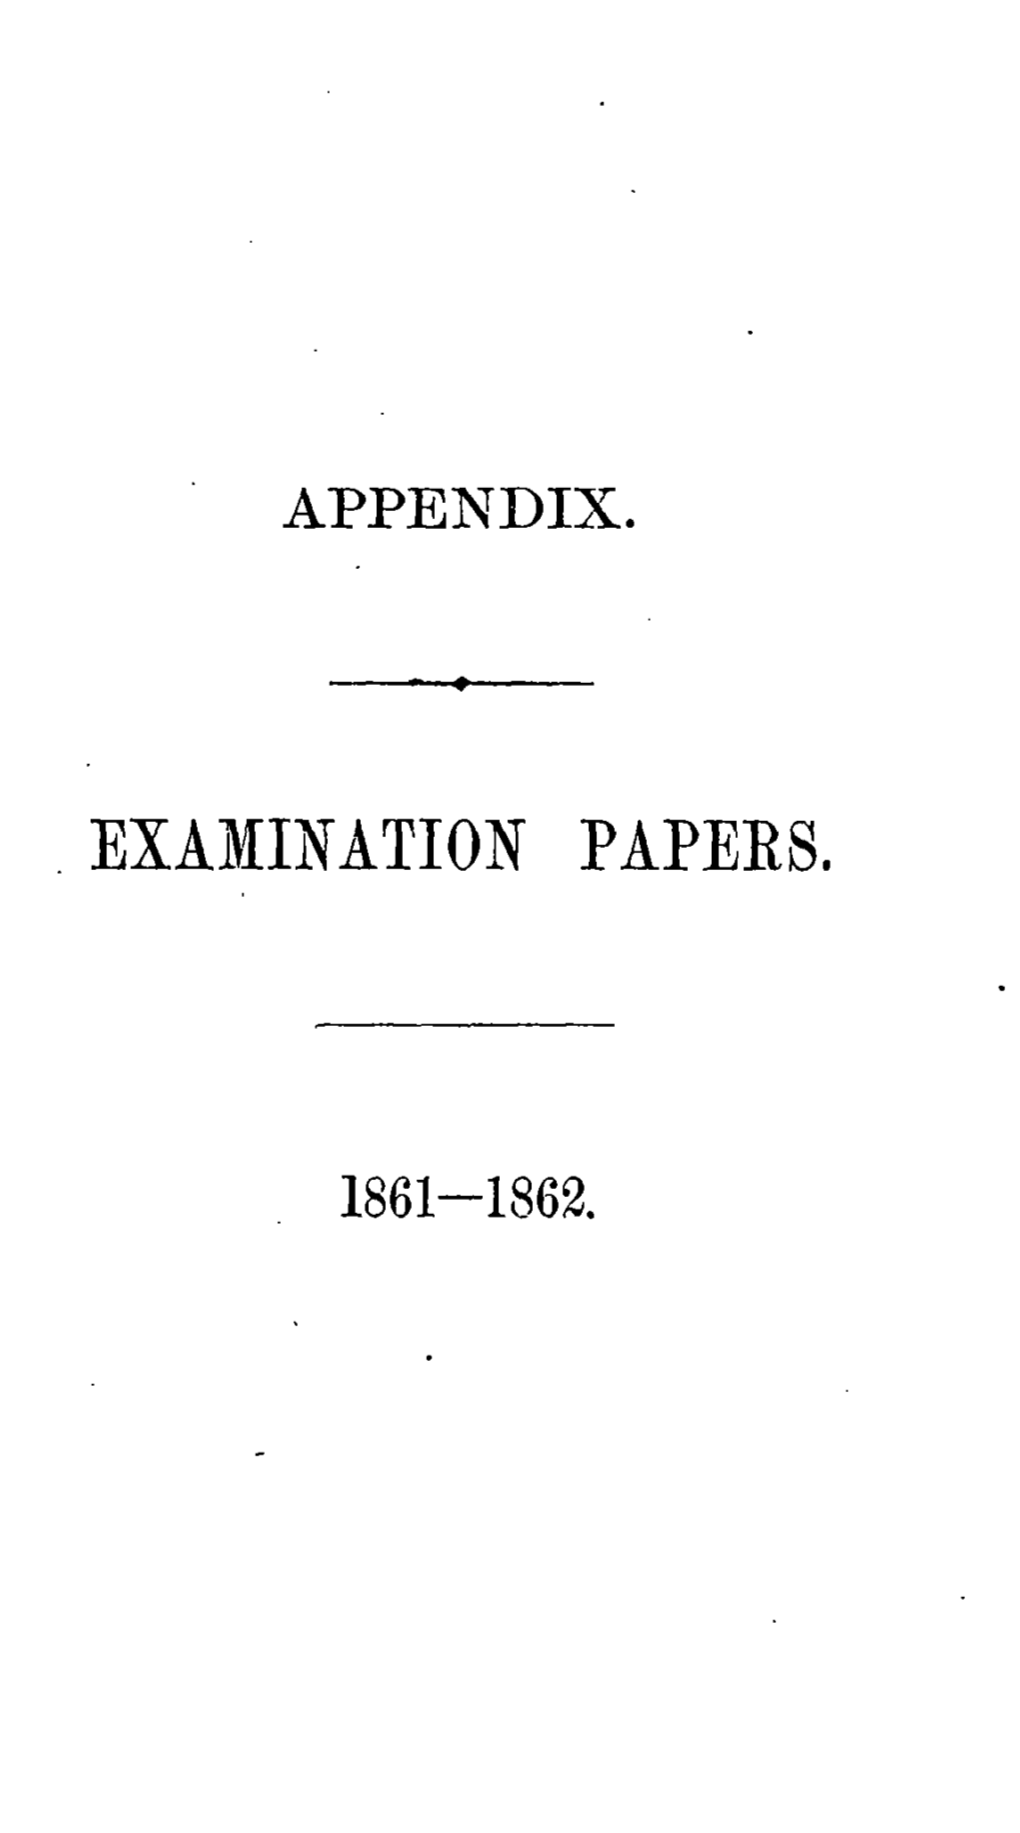 Examination Papers